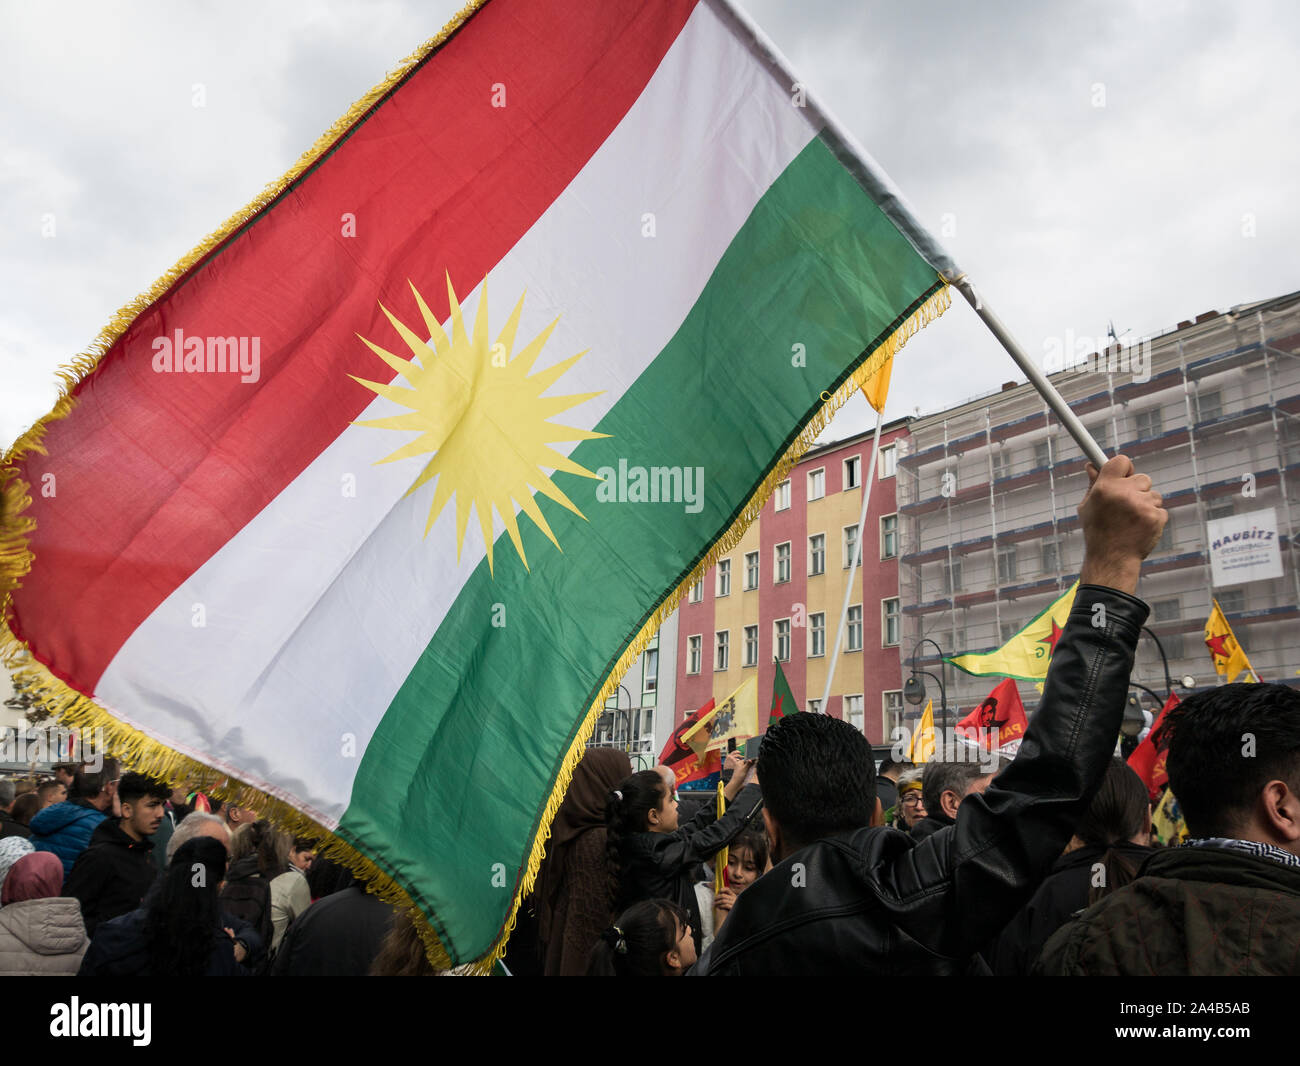 Berlin/Germany: Demostration and protest against Turkish offensive and aggressions in Syria against the Kurds, large Kurdistan flag in the foreground Stock Photo